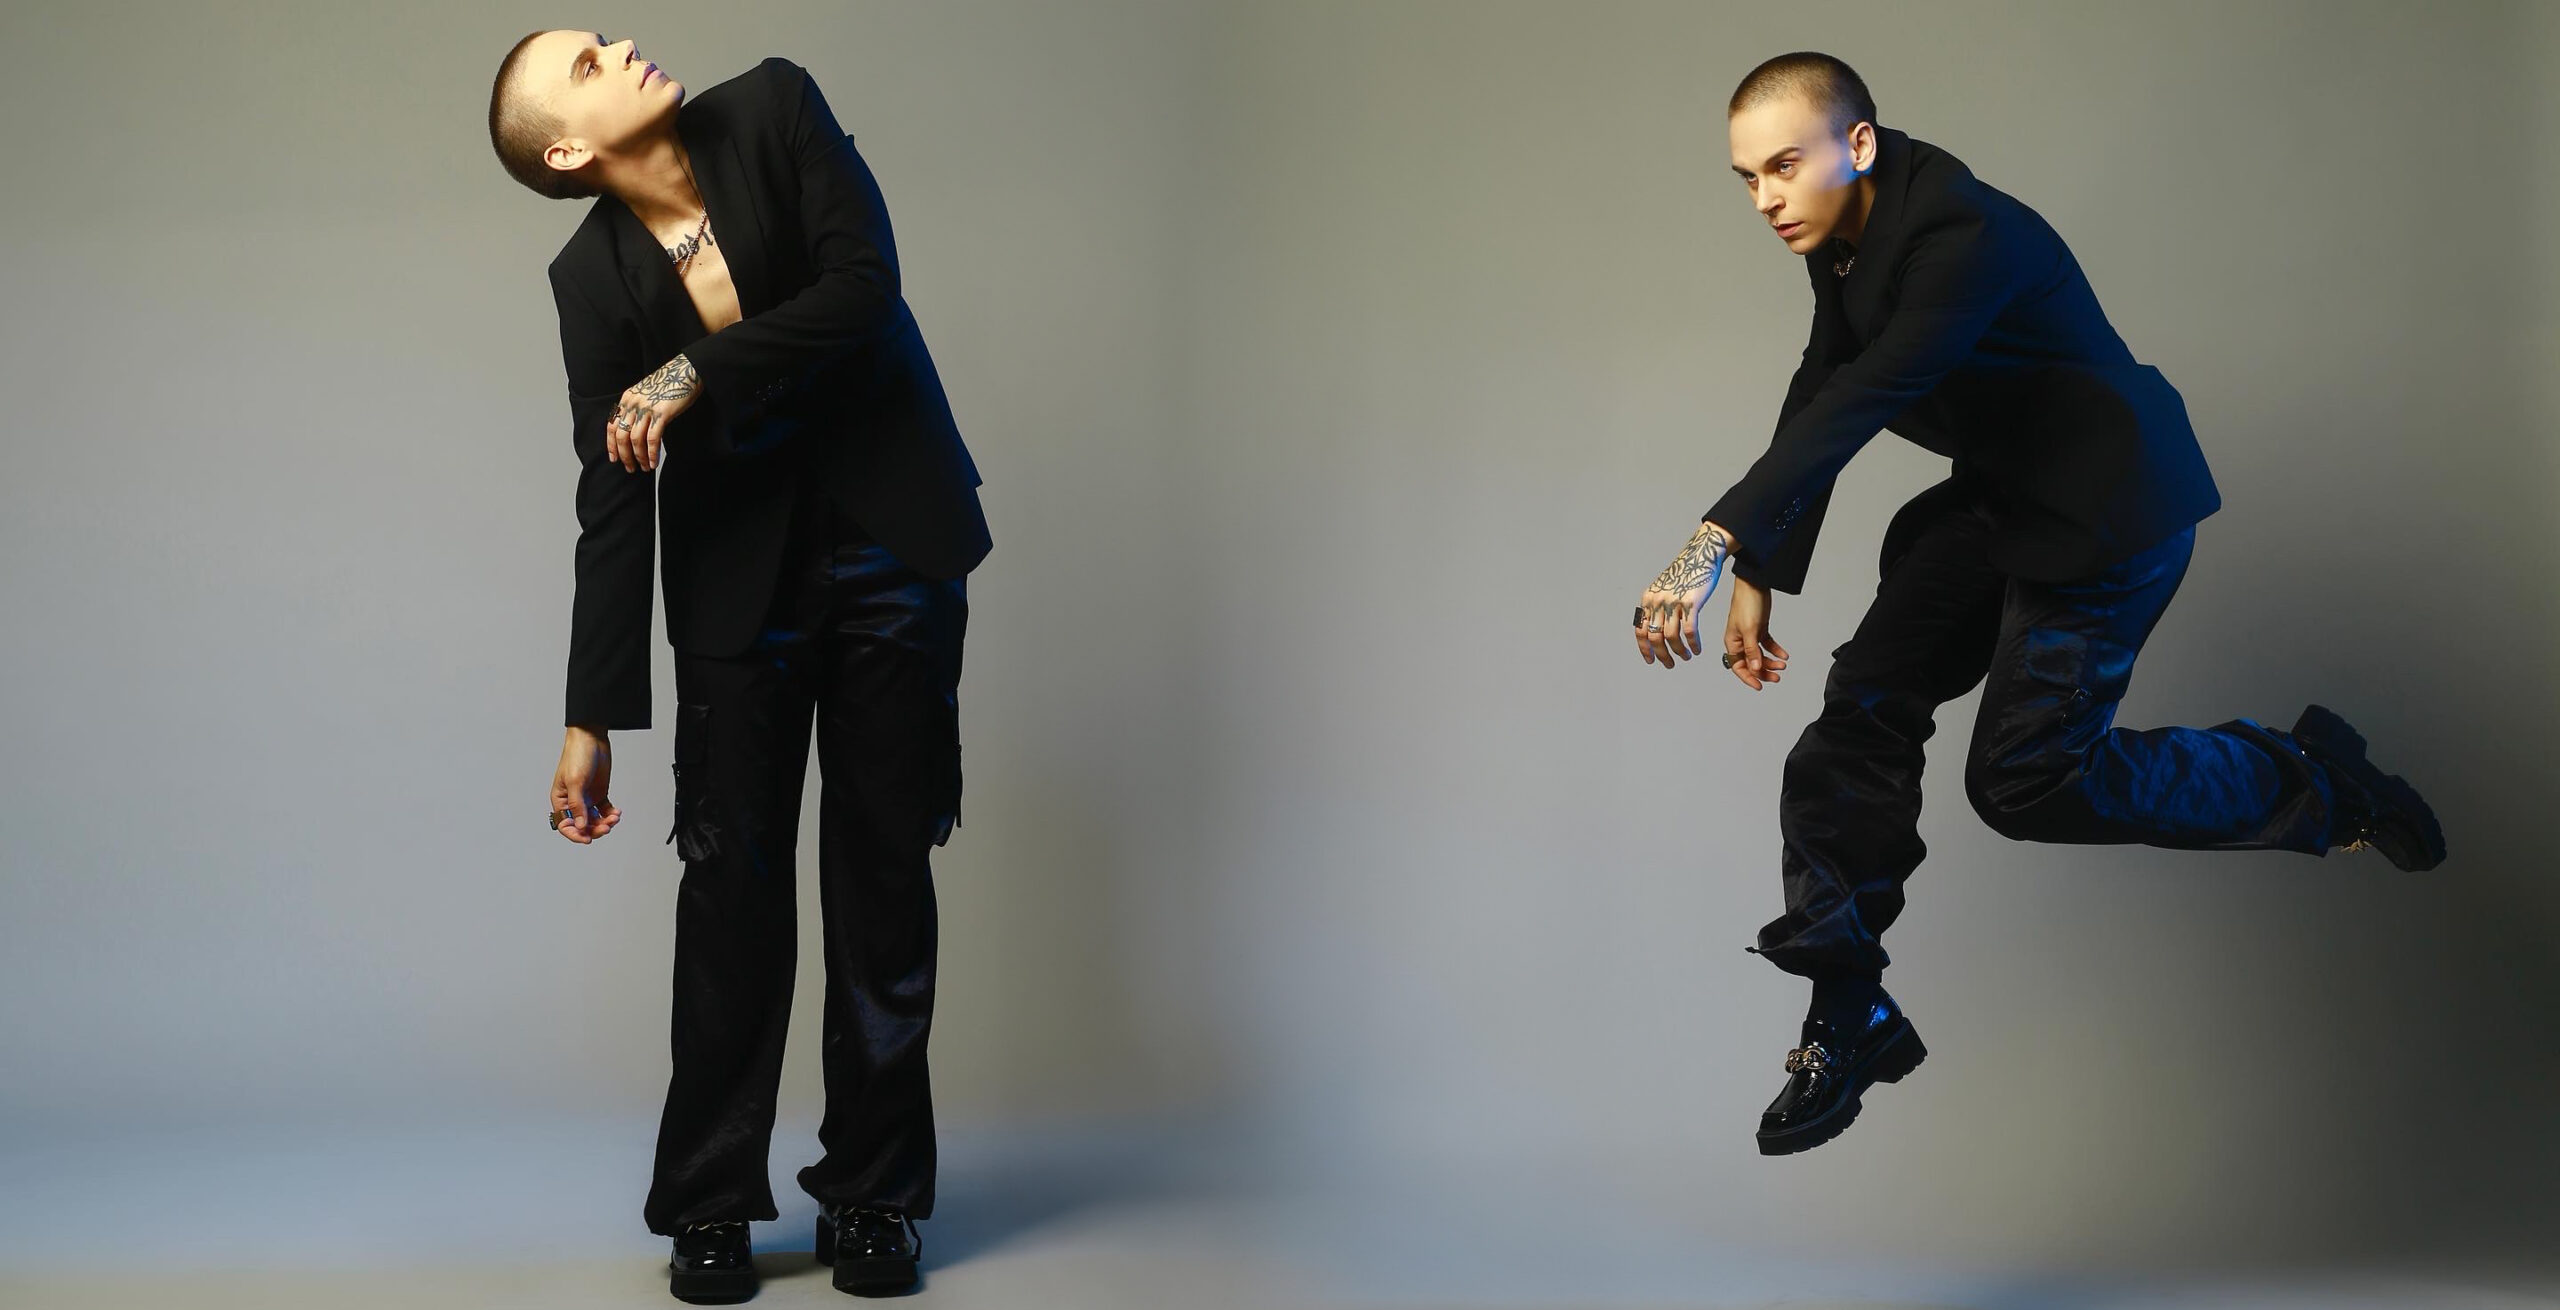 Collage of dance poses by dancer Hayden Frederick.